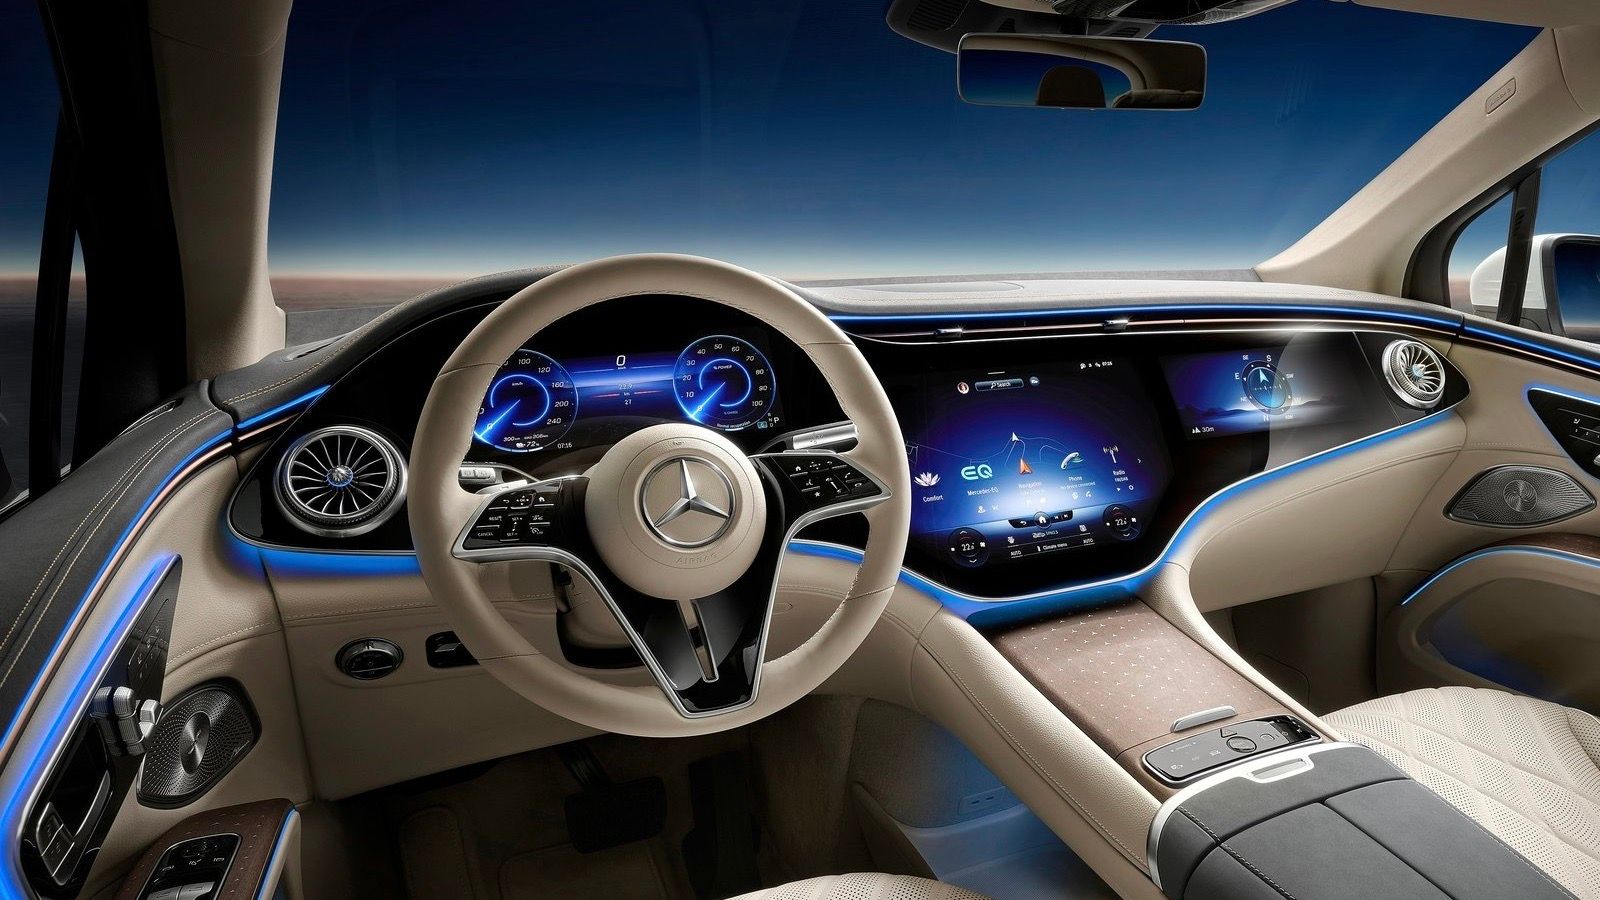 Top 10 Cars With The Biggest Displays